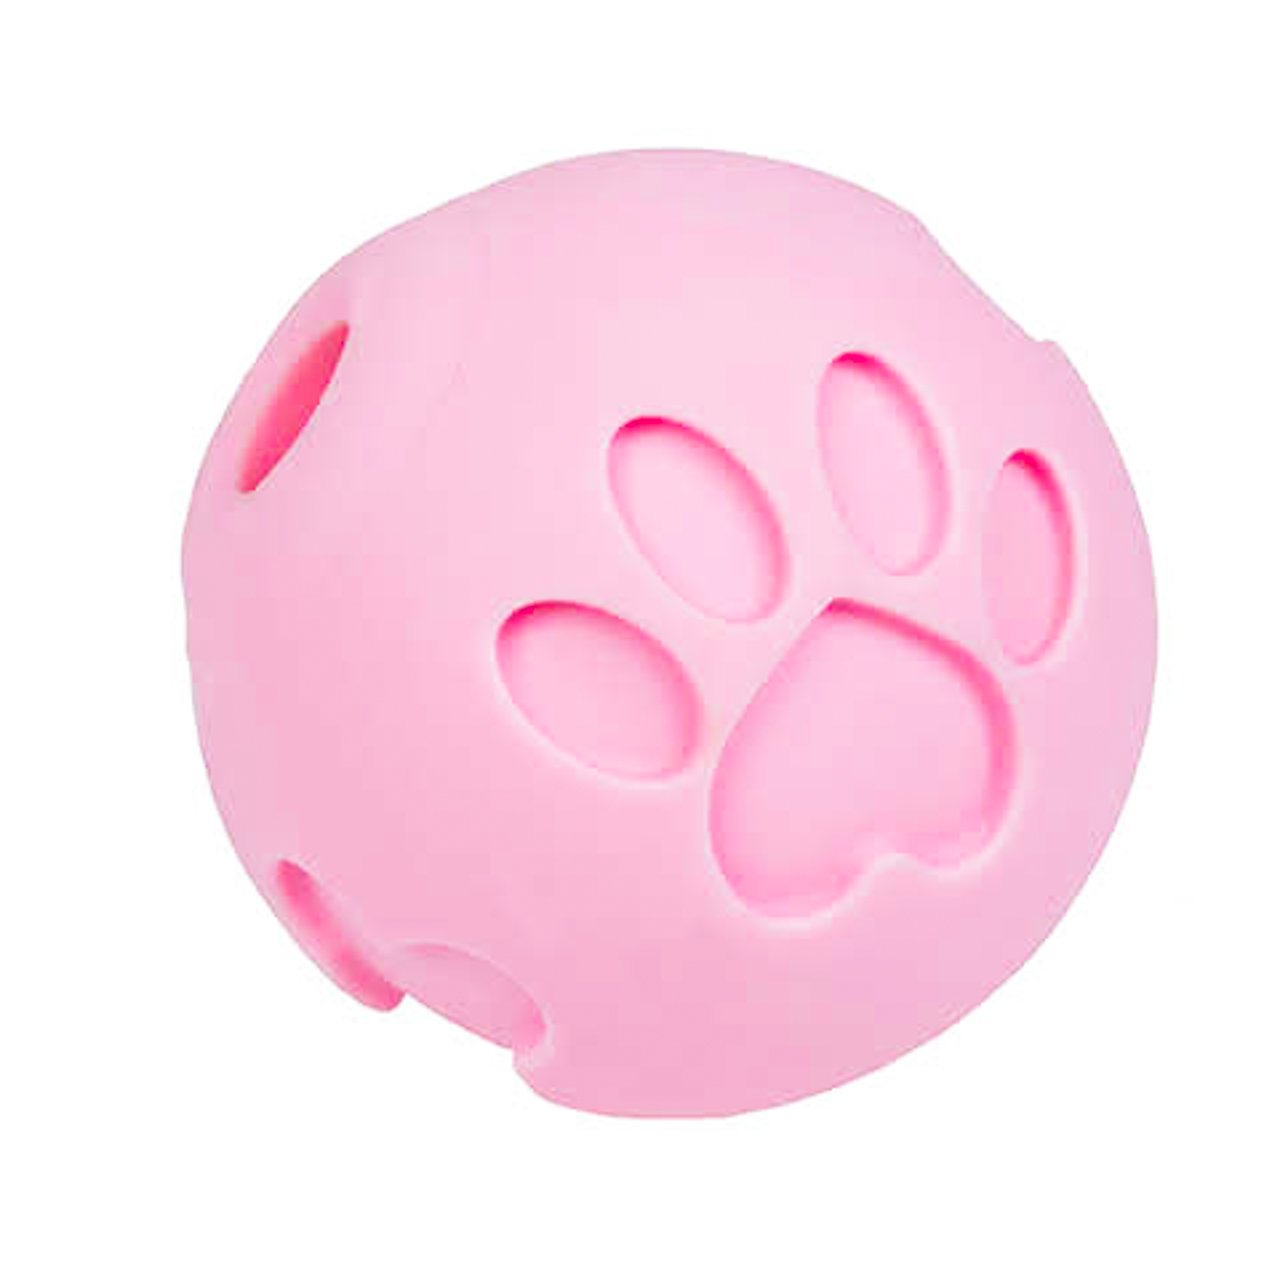 Treat Dispensing Squeaky Ball for Dogs